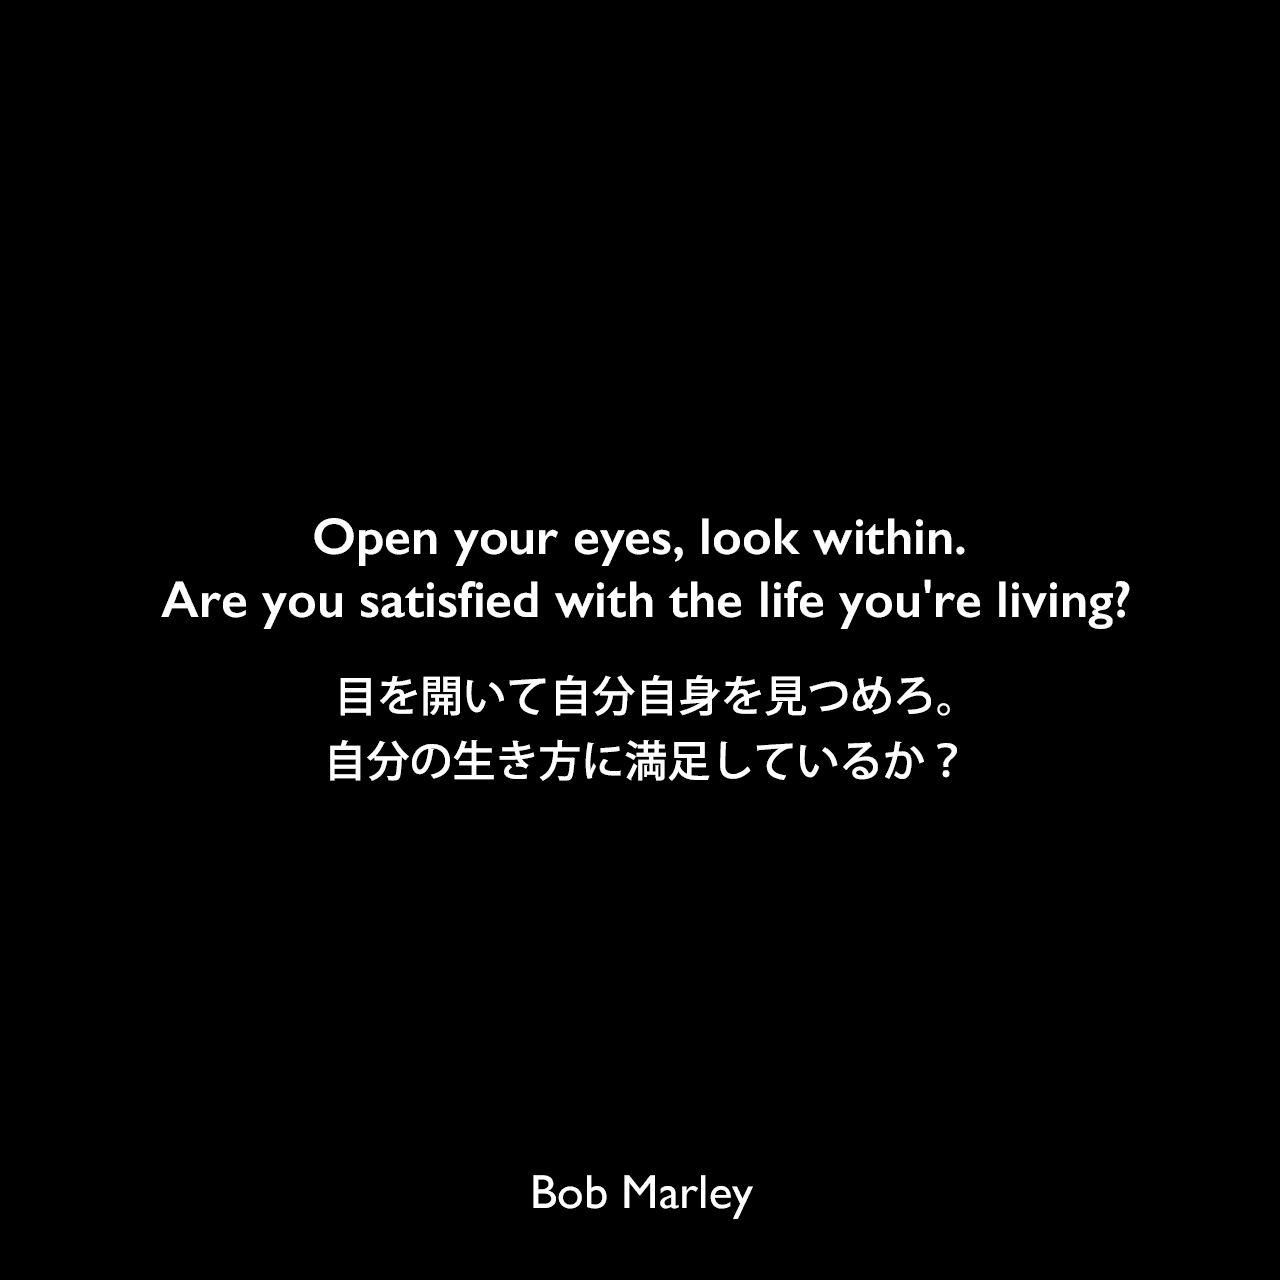 Open your eyes, look within. Are you satisfied with the life you're living?目を開いて自分自身を見つめろ。自分の生き方に満足しているか？Bob Marley